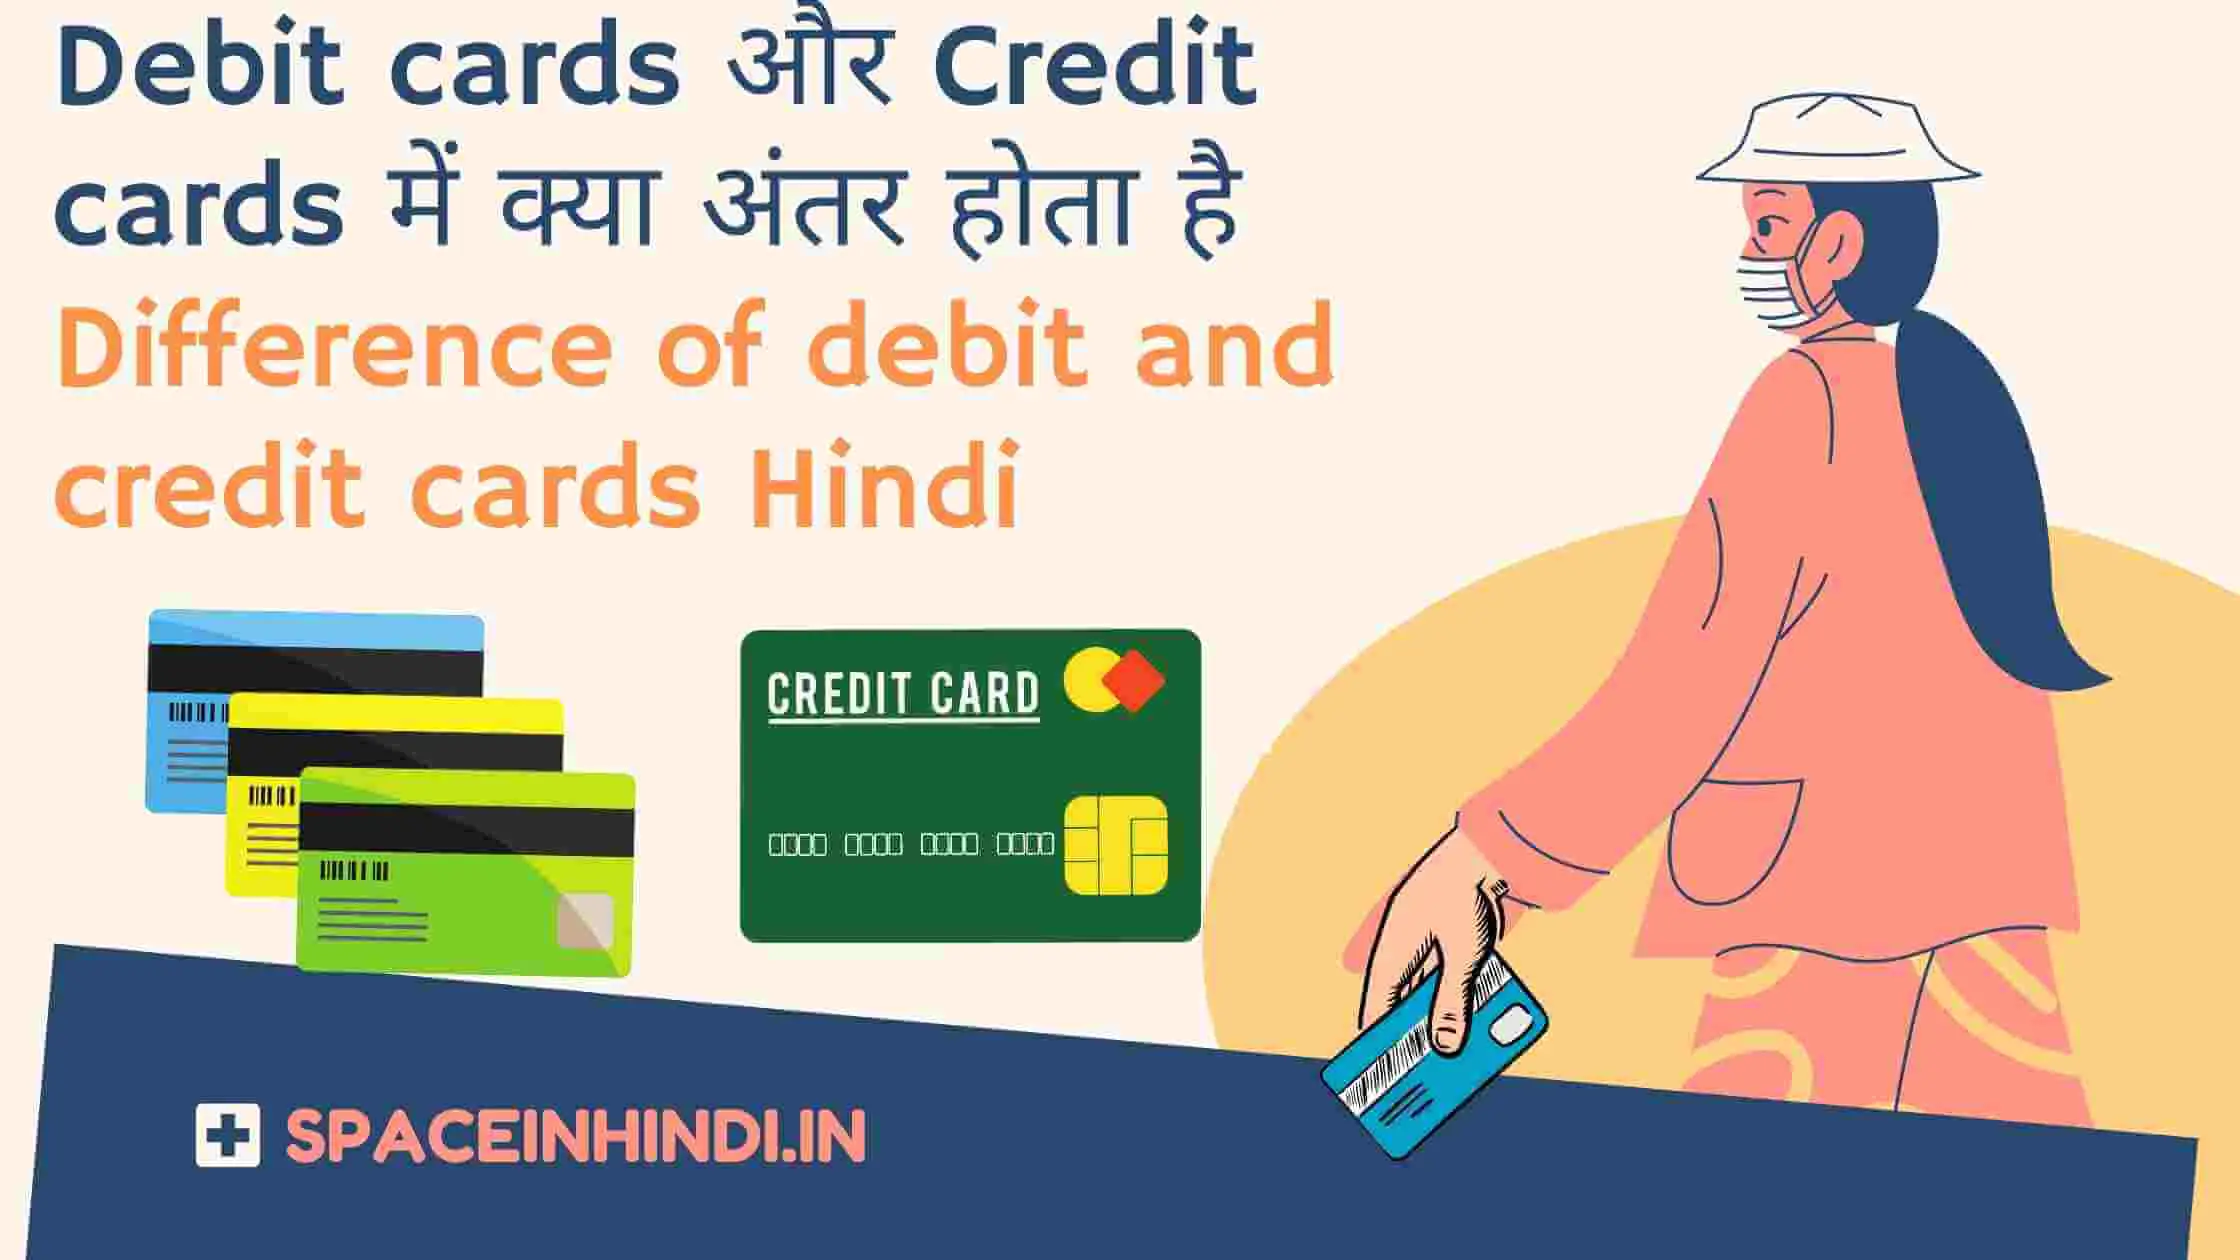 Debit cards और Credit cards में क्या अंतर होता है | Difference of debit and credit cards Hindi